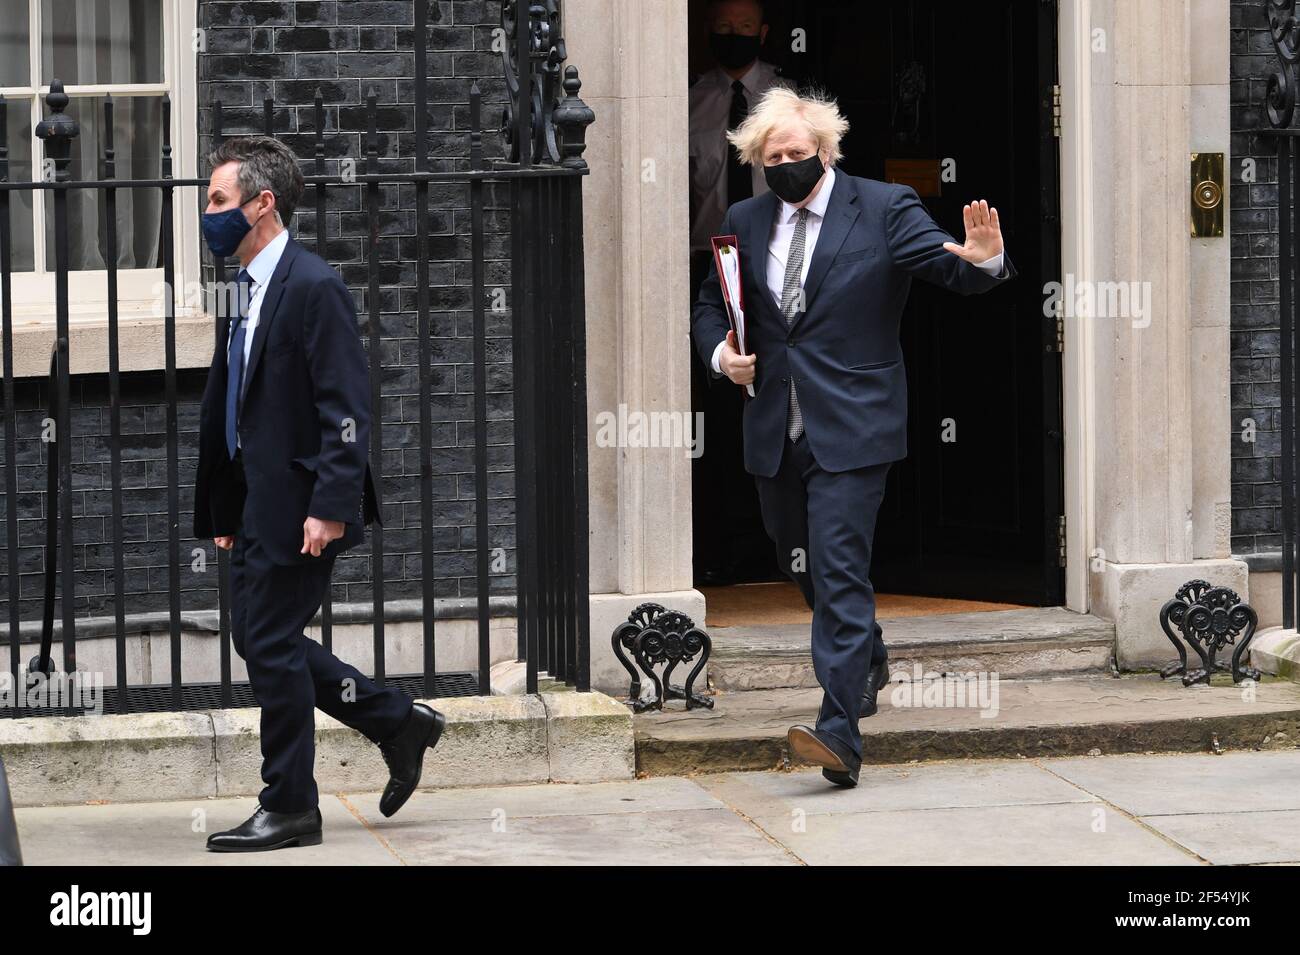 Prime Minister Boris Johnson leaves 10 Downing Street to attend Prime Minister's Questions at the Houses of Parliament. Picture date: Wednesday March 24, 2021. Stock Photo